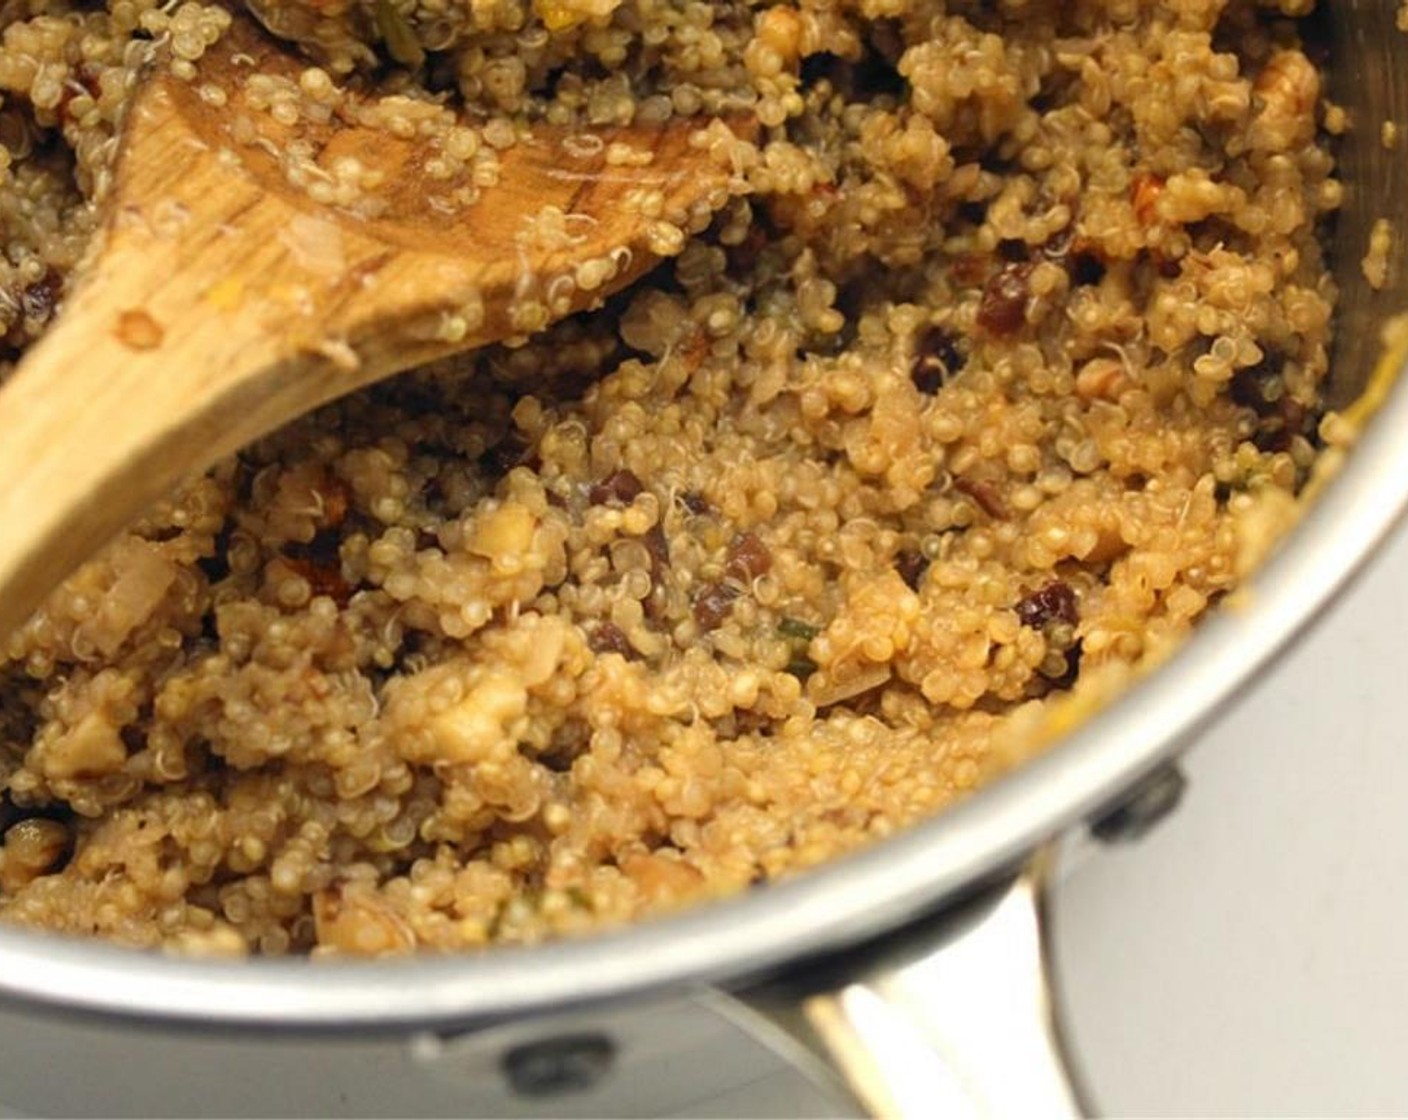 step 3 Add Quinoa (1 cup), Lemon (1), Raisins (1/4 cup), Cayenne Pepper (1 dash), Salt (to taste), and Ground Black Pepper (to taste). Cook for about 2 minutes.